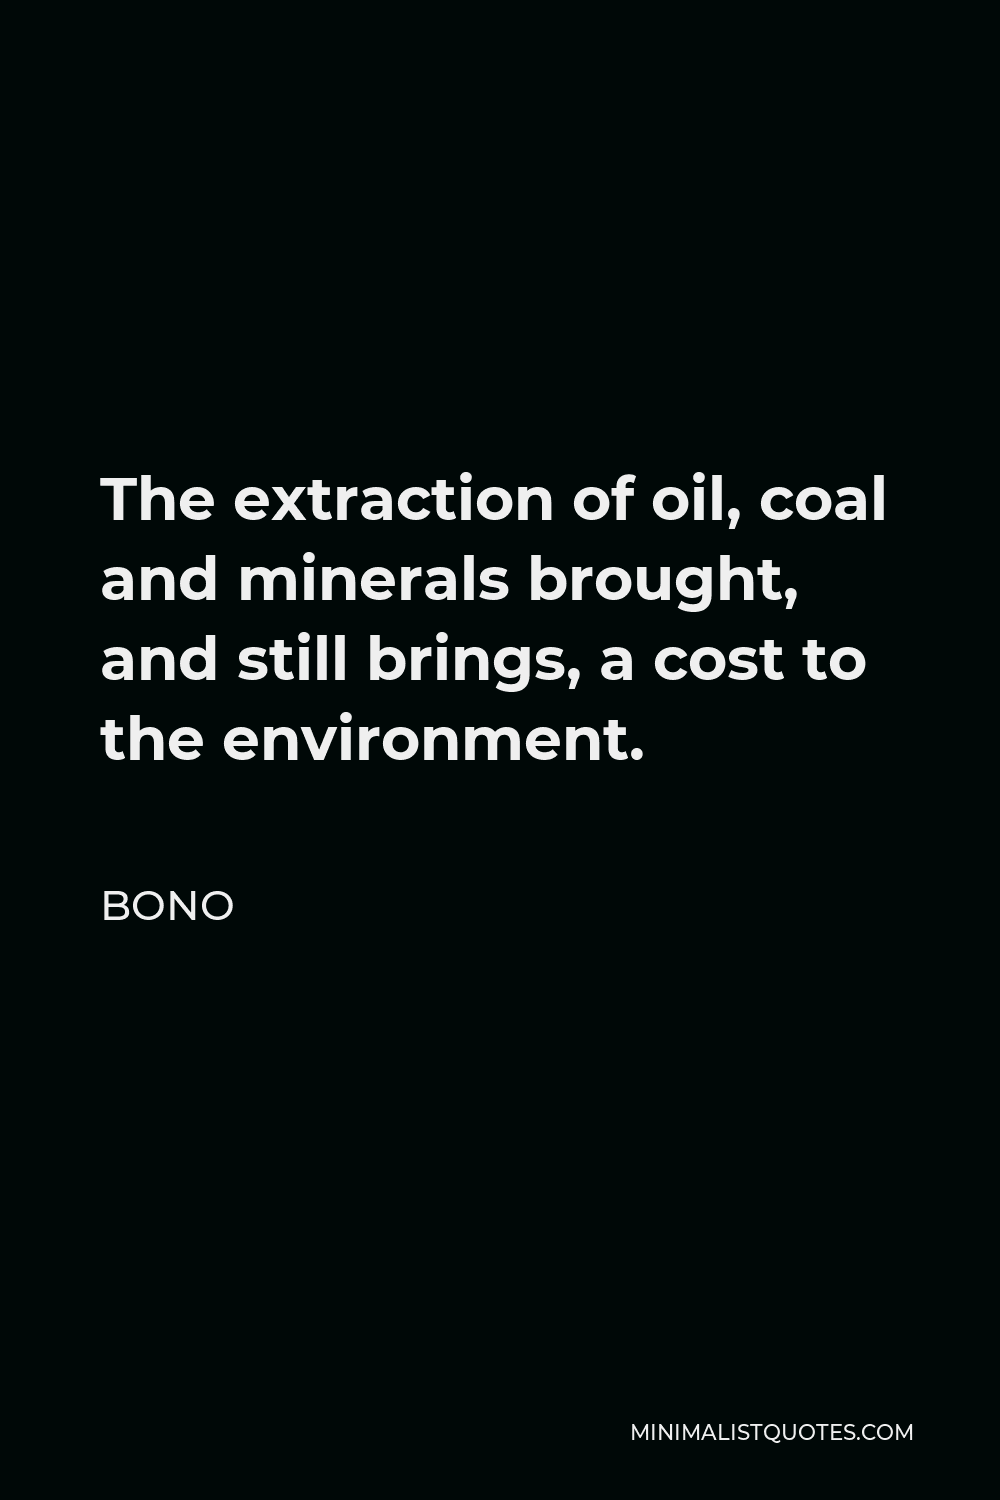 Bono Quote - The extraction of oil, coal and minerals brought, and still brings, a cost to the environment.